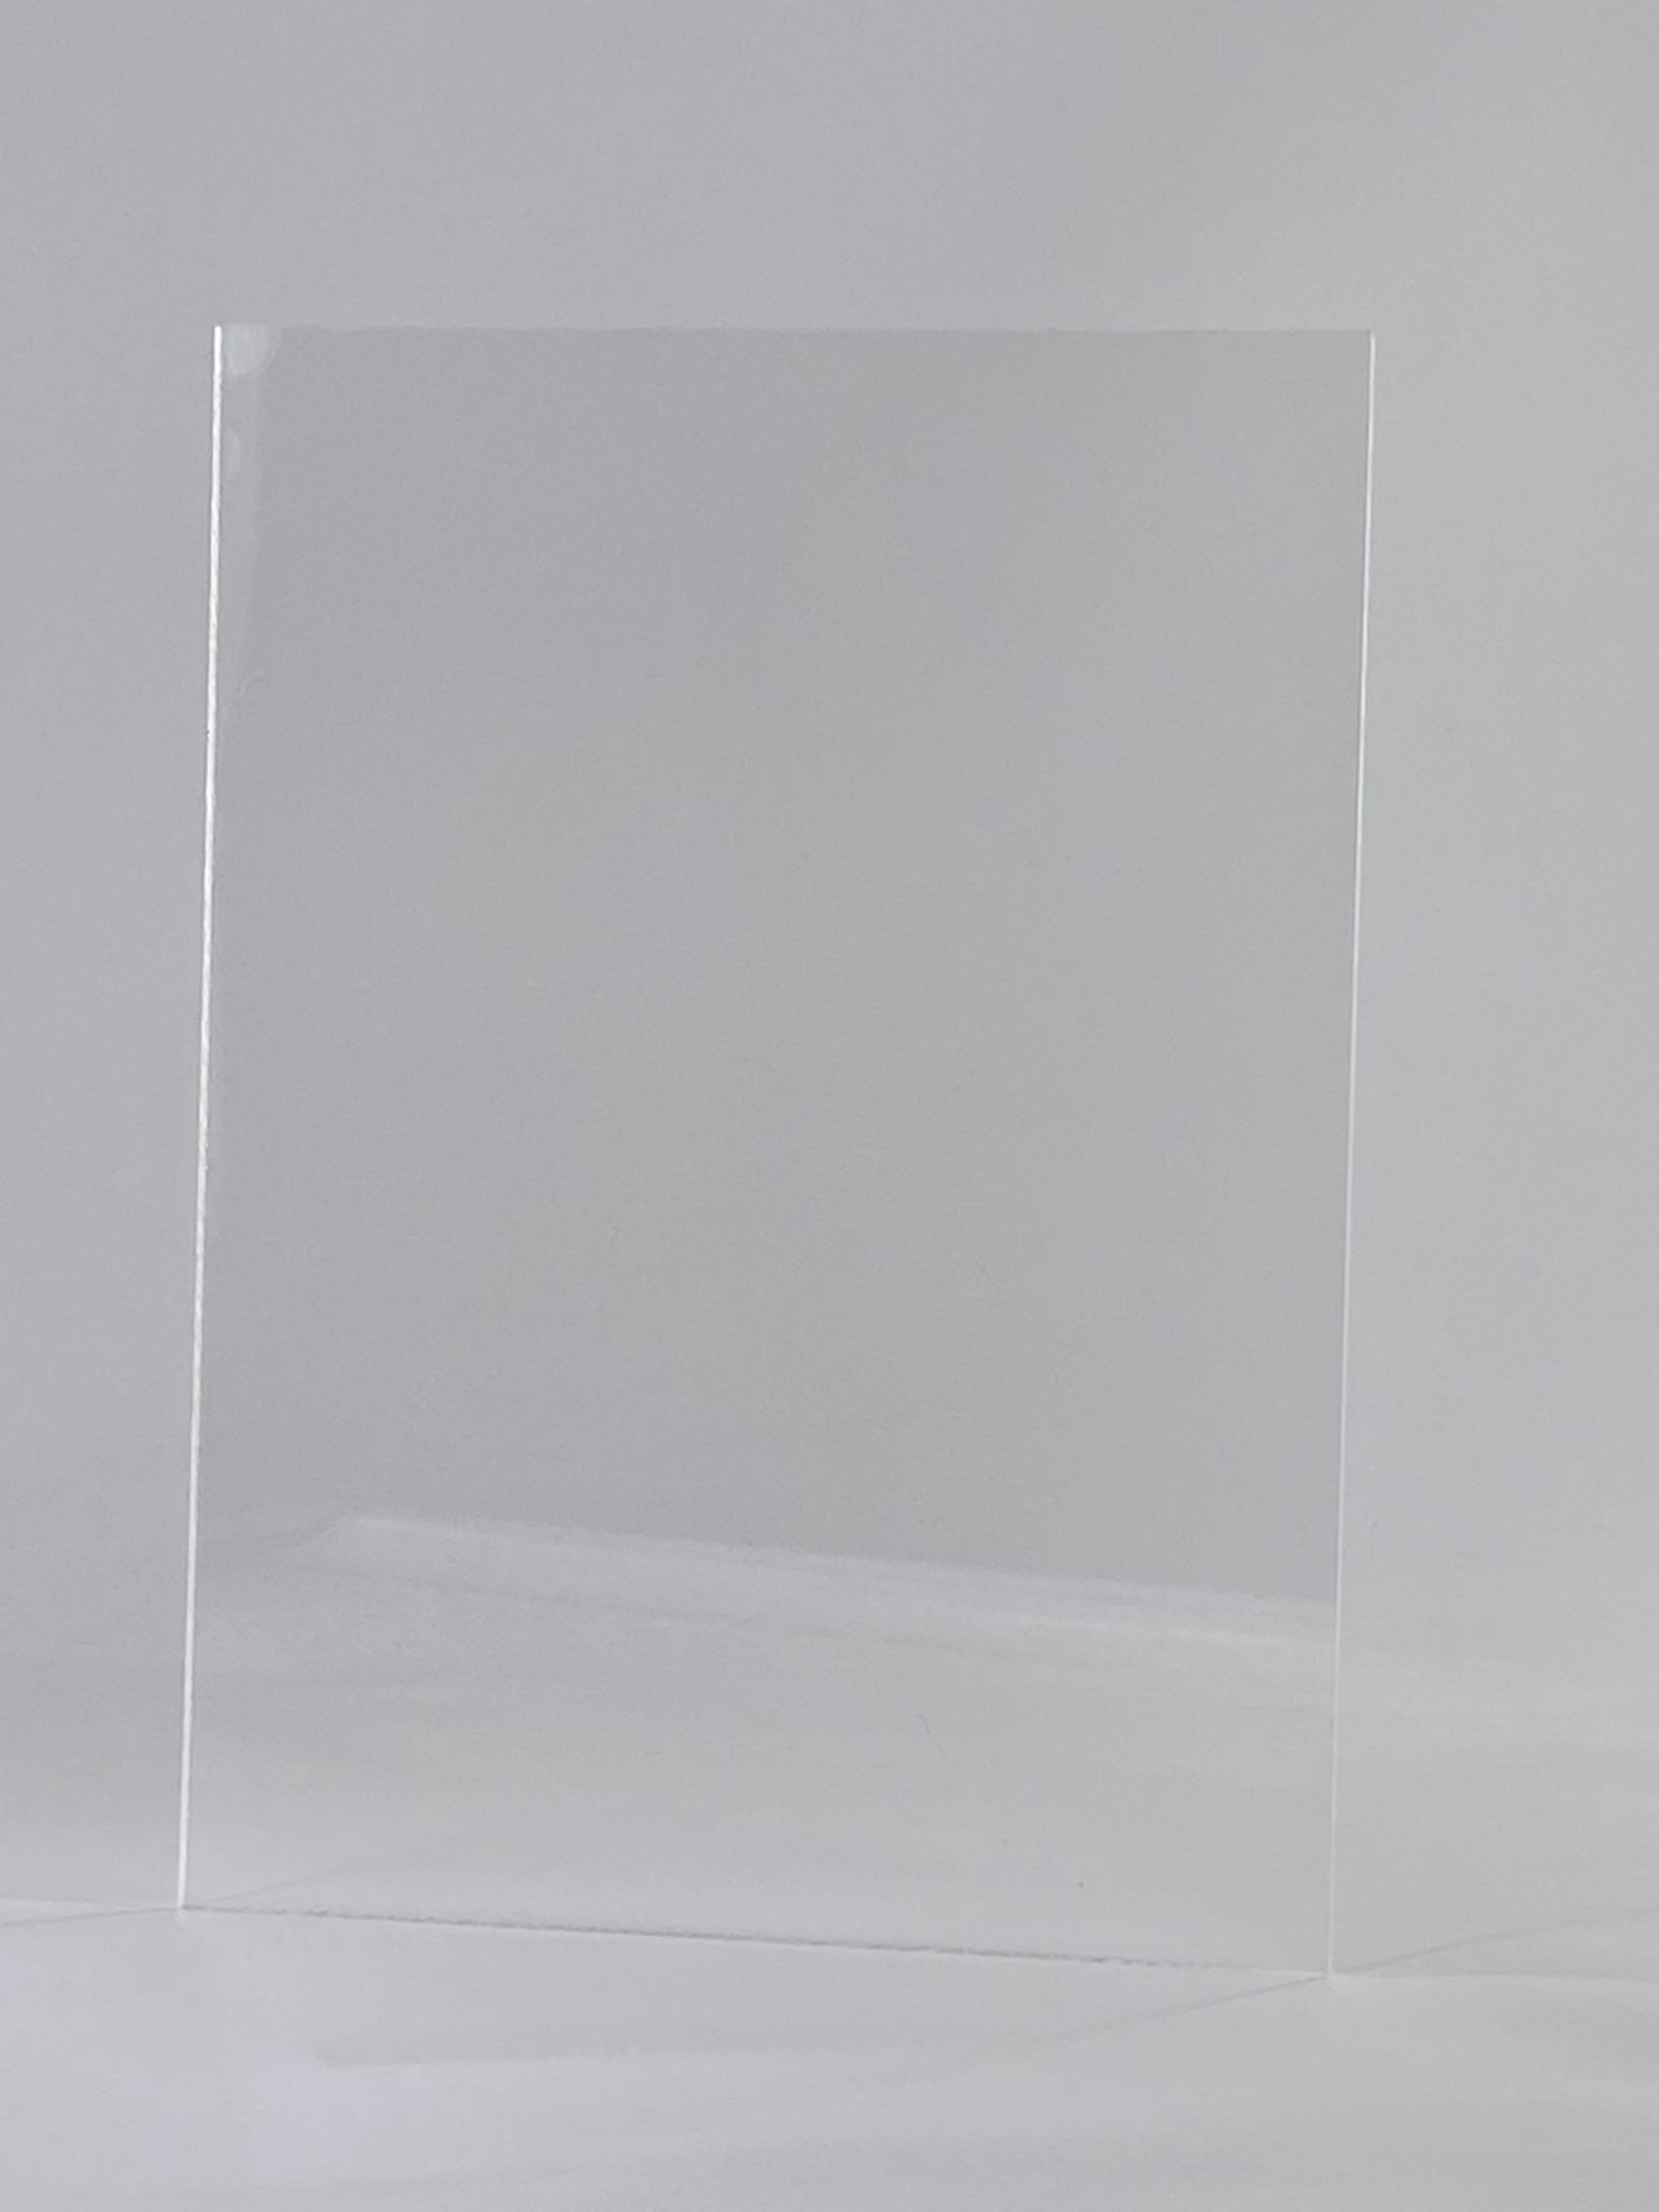 Acrylic Sheets for Sale (Plexiglass) - Clear Plastic, Extruded